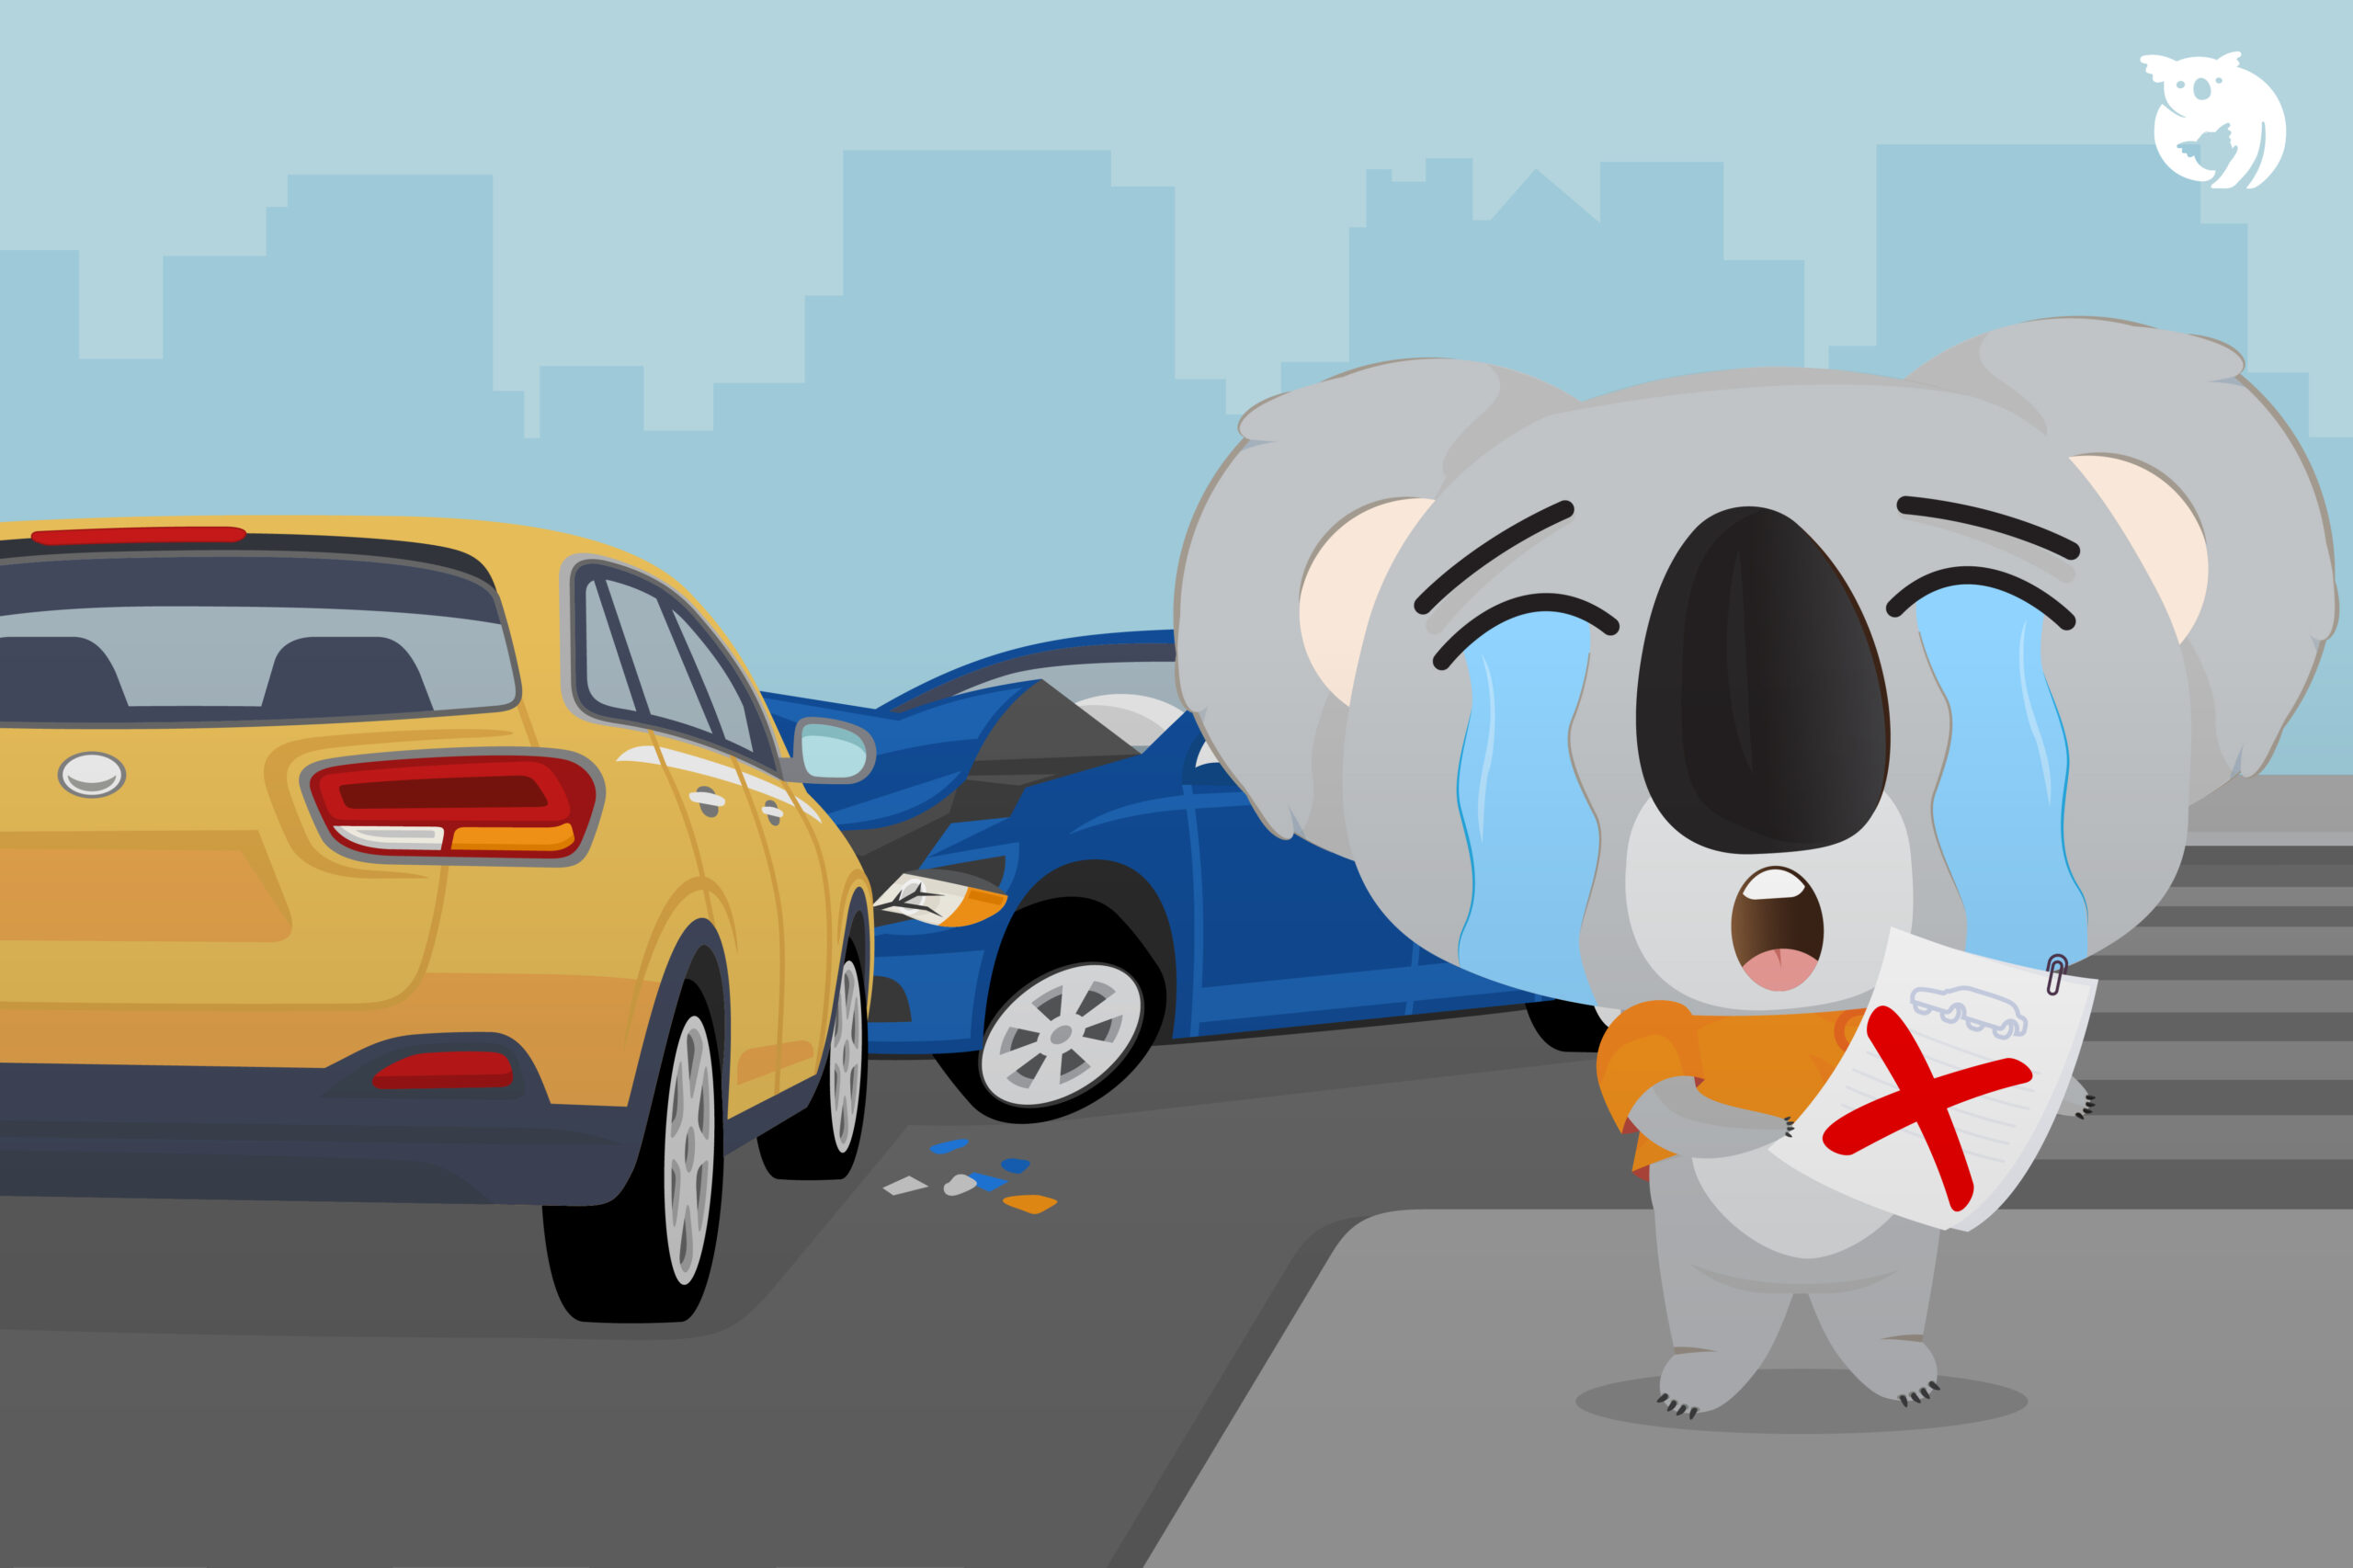 Car Insurance Claim Rejected? Here Are 6 Reasons Why